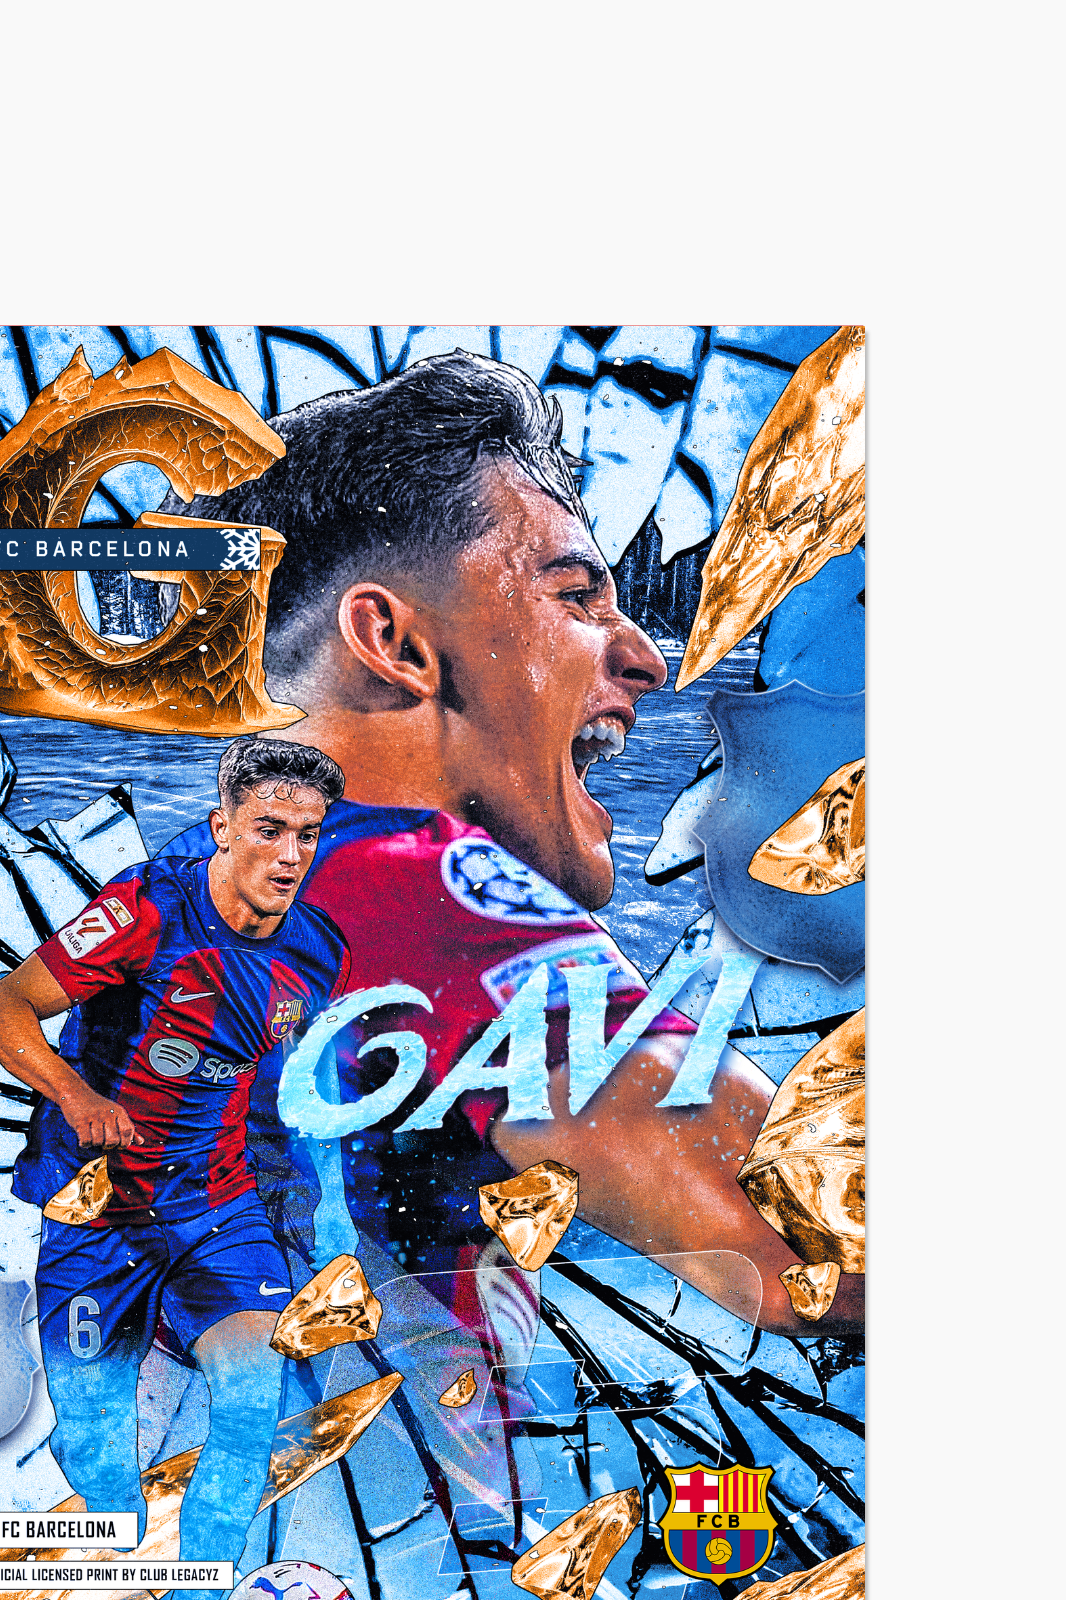 FC Barcelona - Gavi Frozen Poster limited to 100